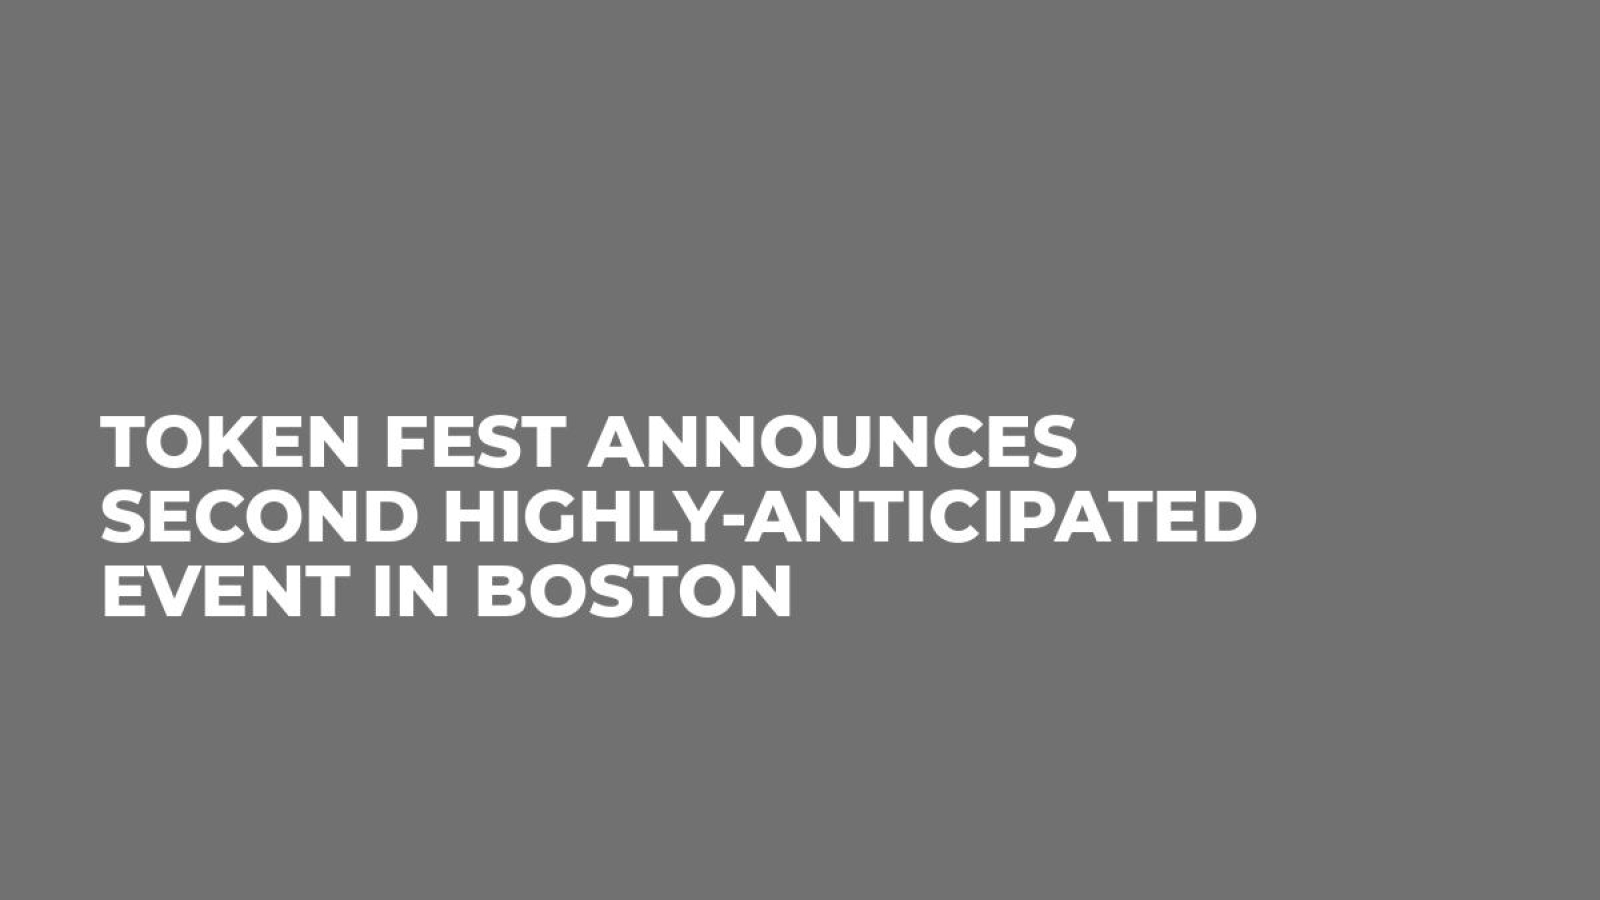 Token Fest Announces Second Highly-Anticipated Event in Boston